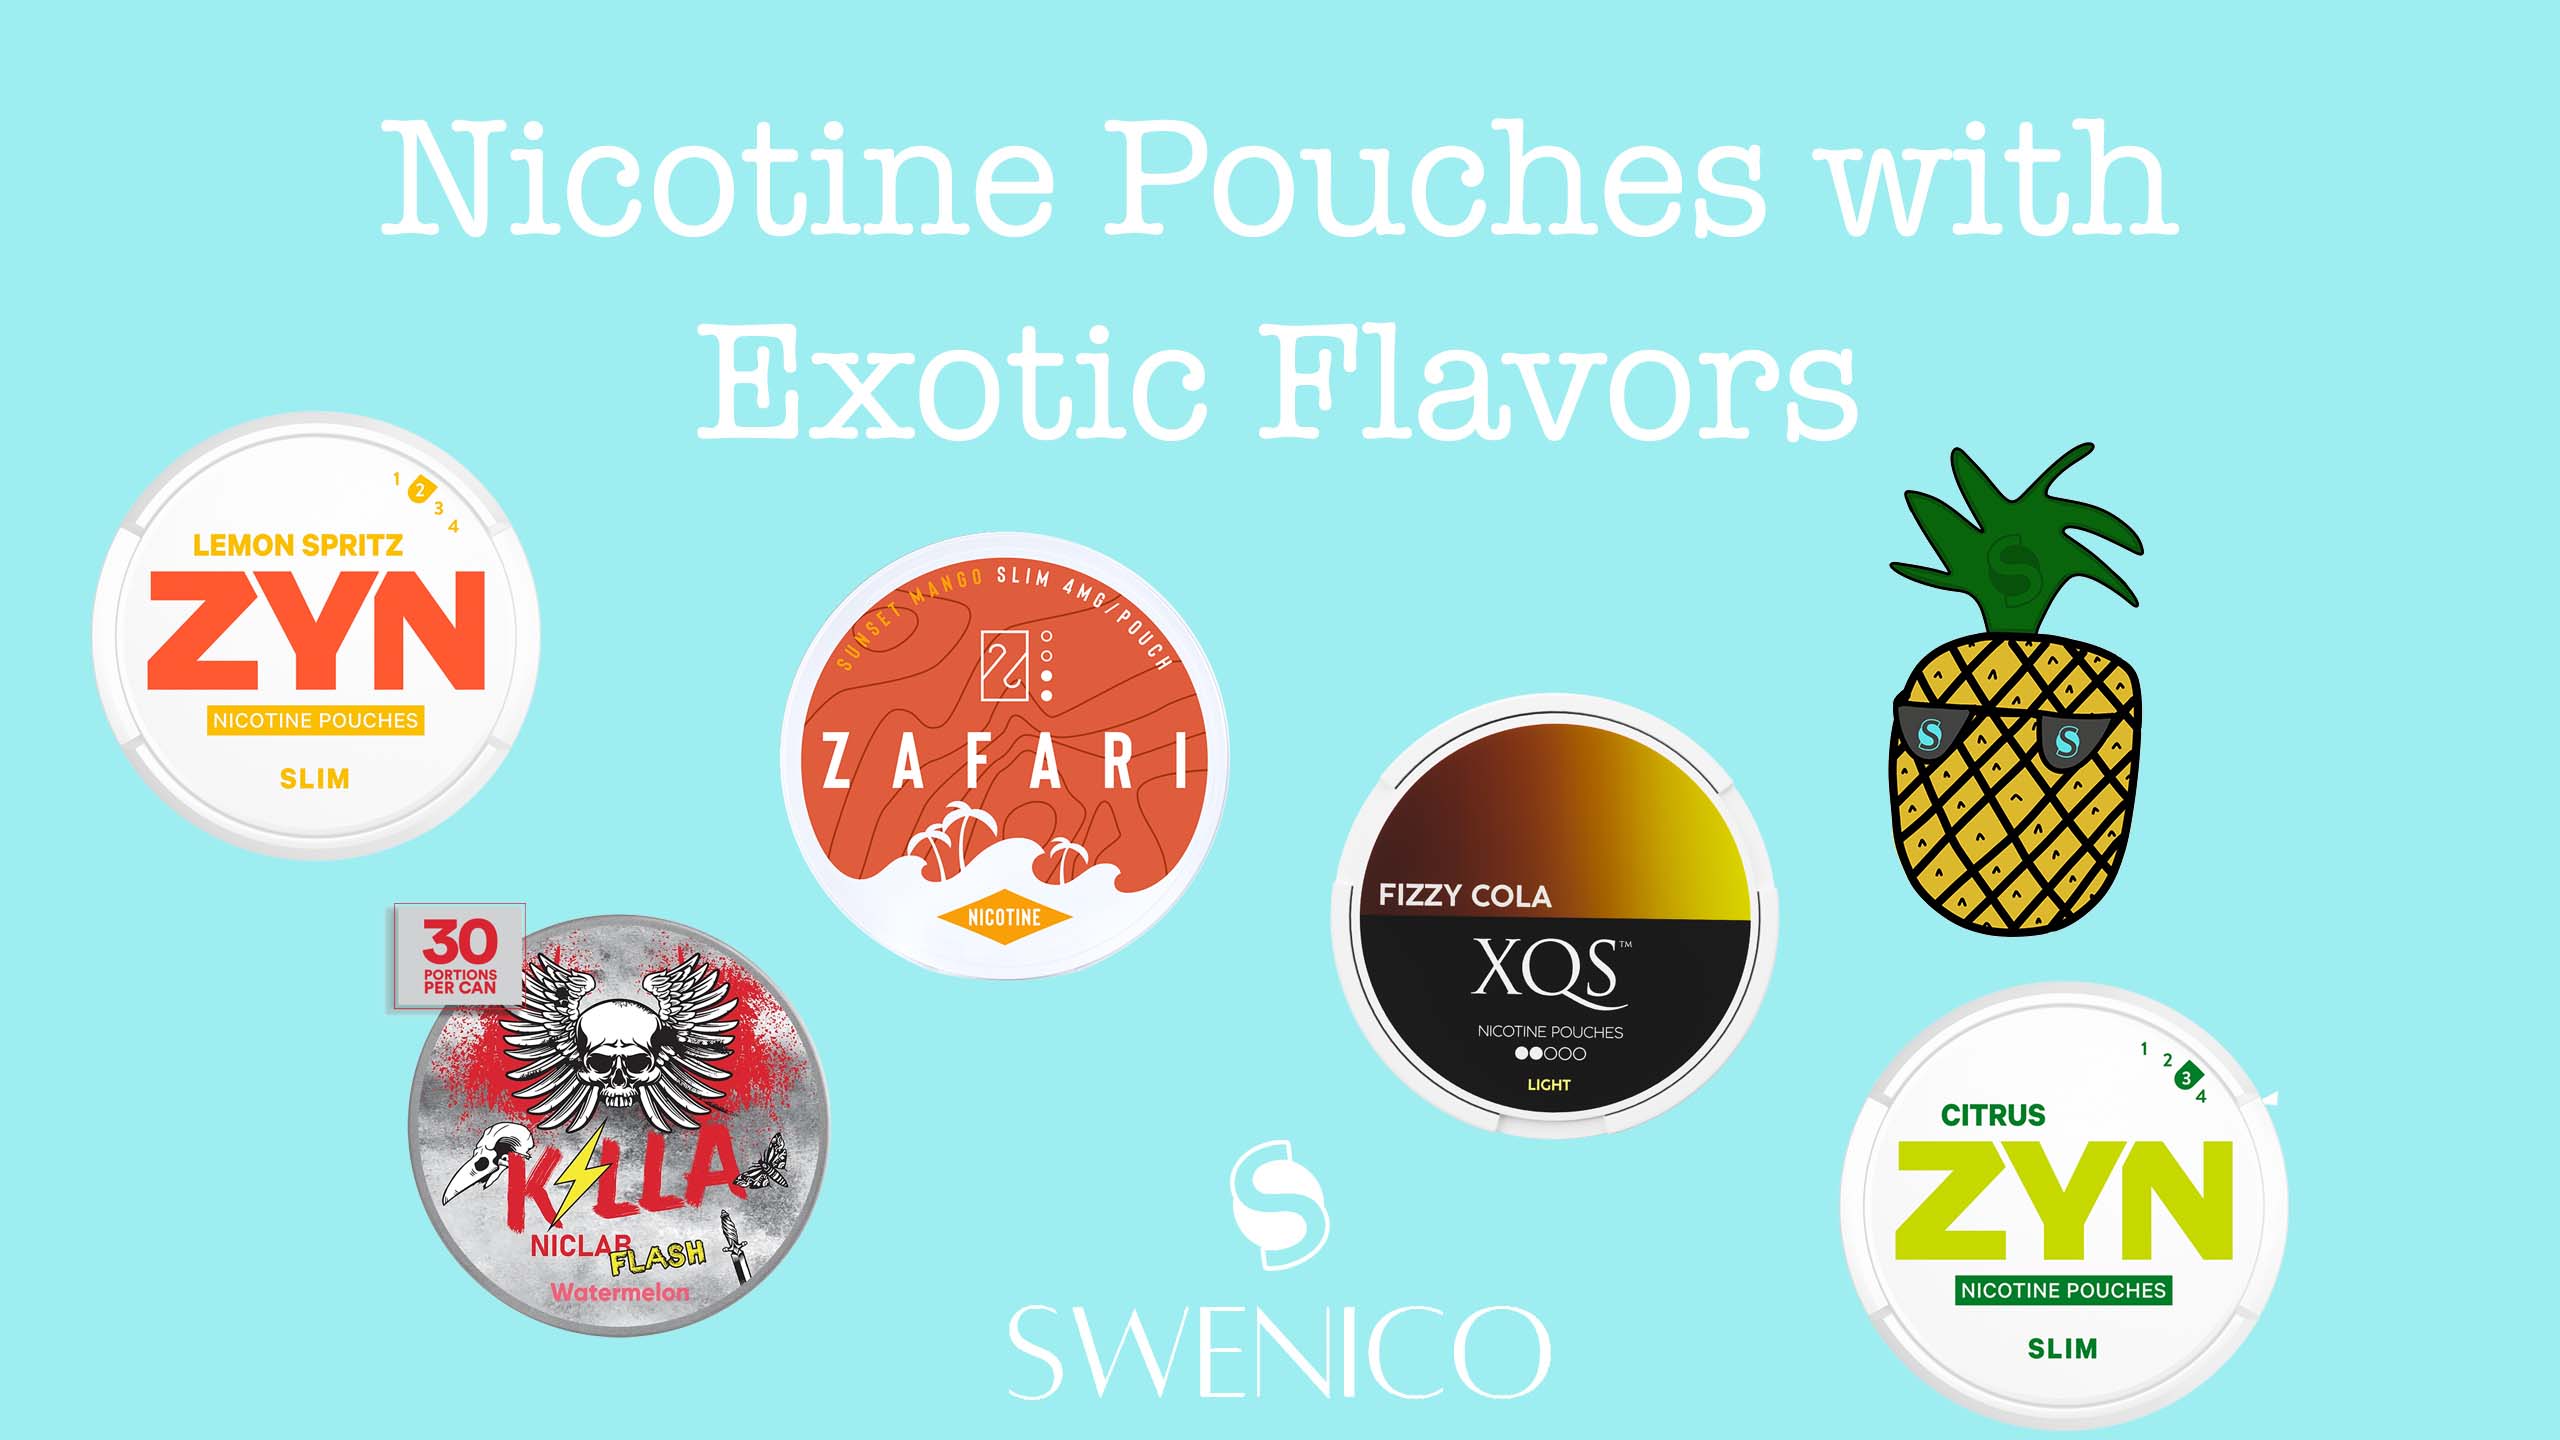 ZYN - First Line Pods - Nicotine Pouches